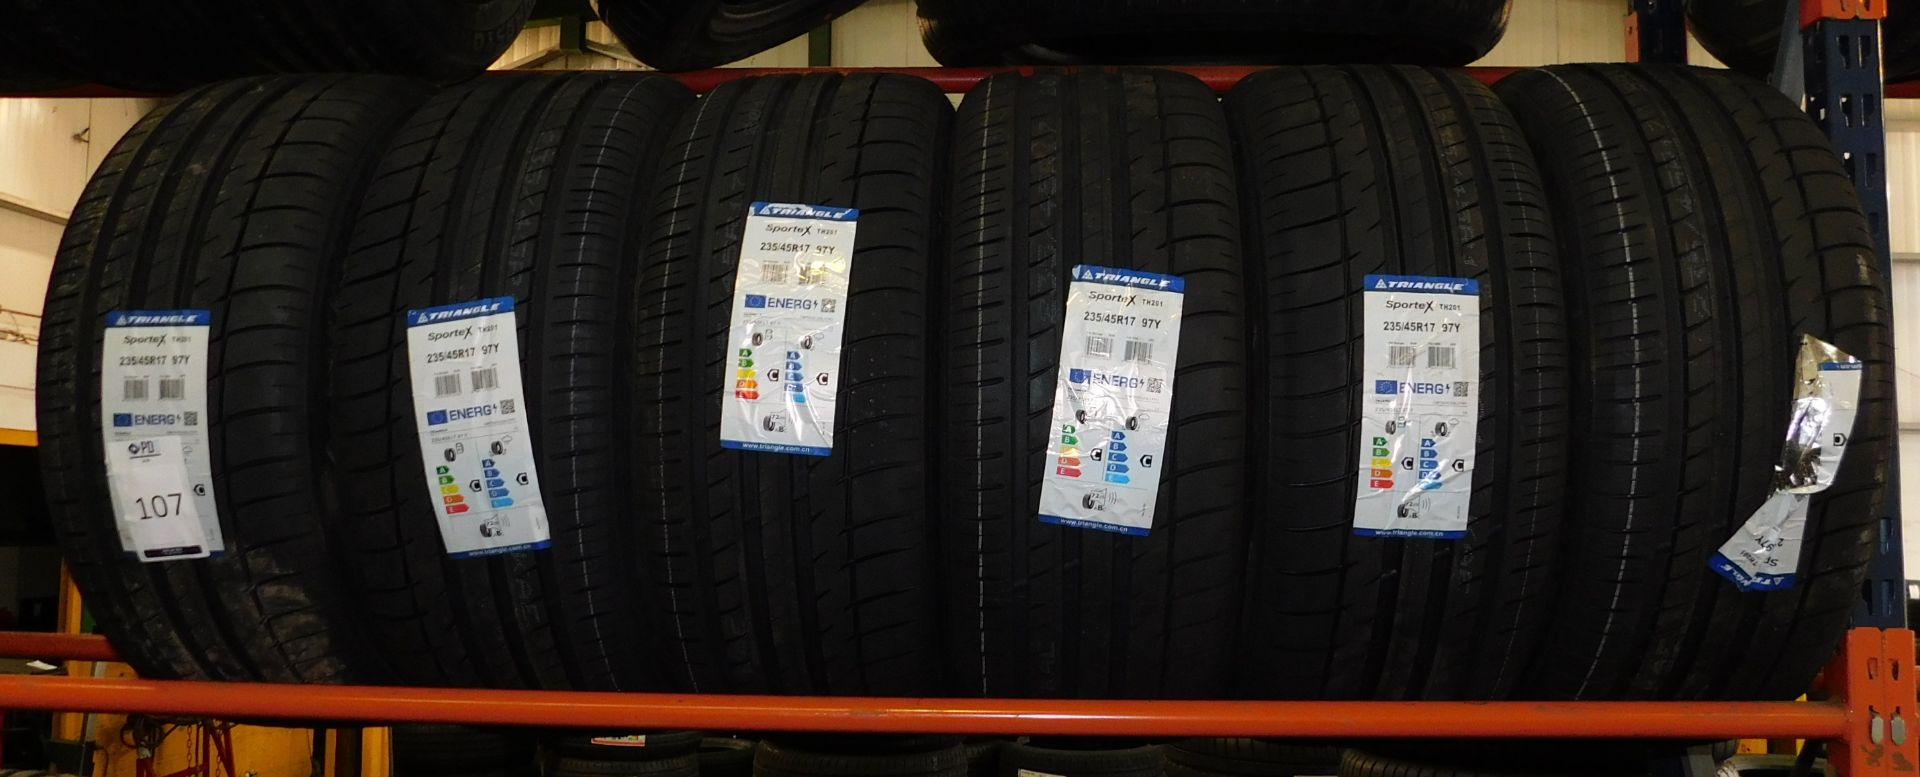 6 tyres, size 235/45 17 (Triangle) (Location Northampton. Please Refer to General Notes)